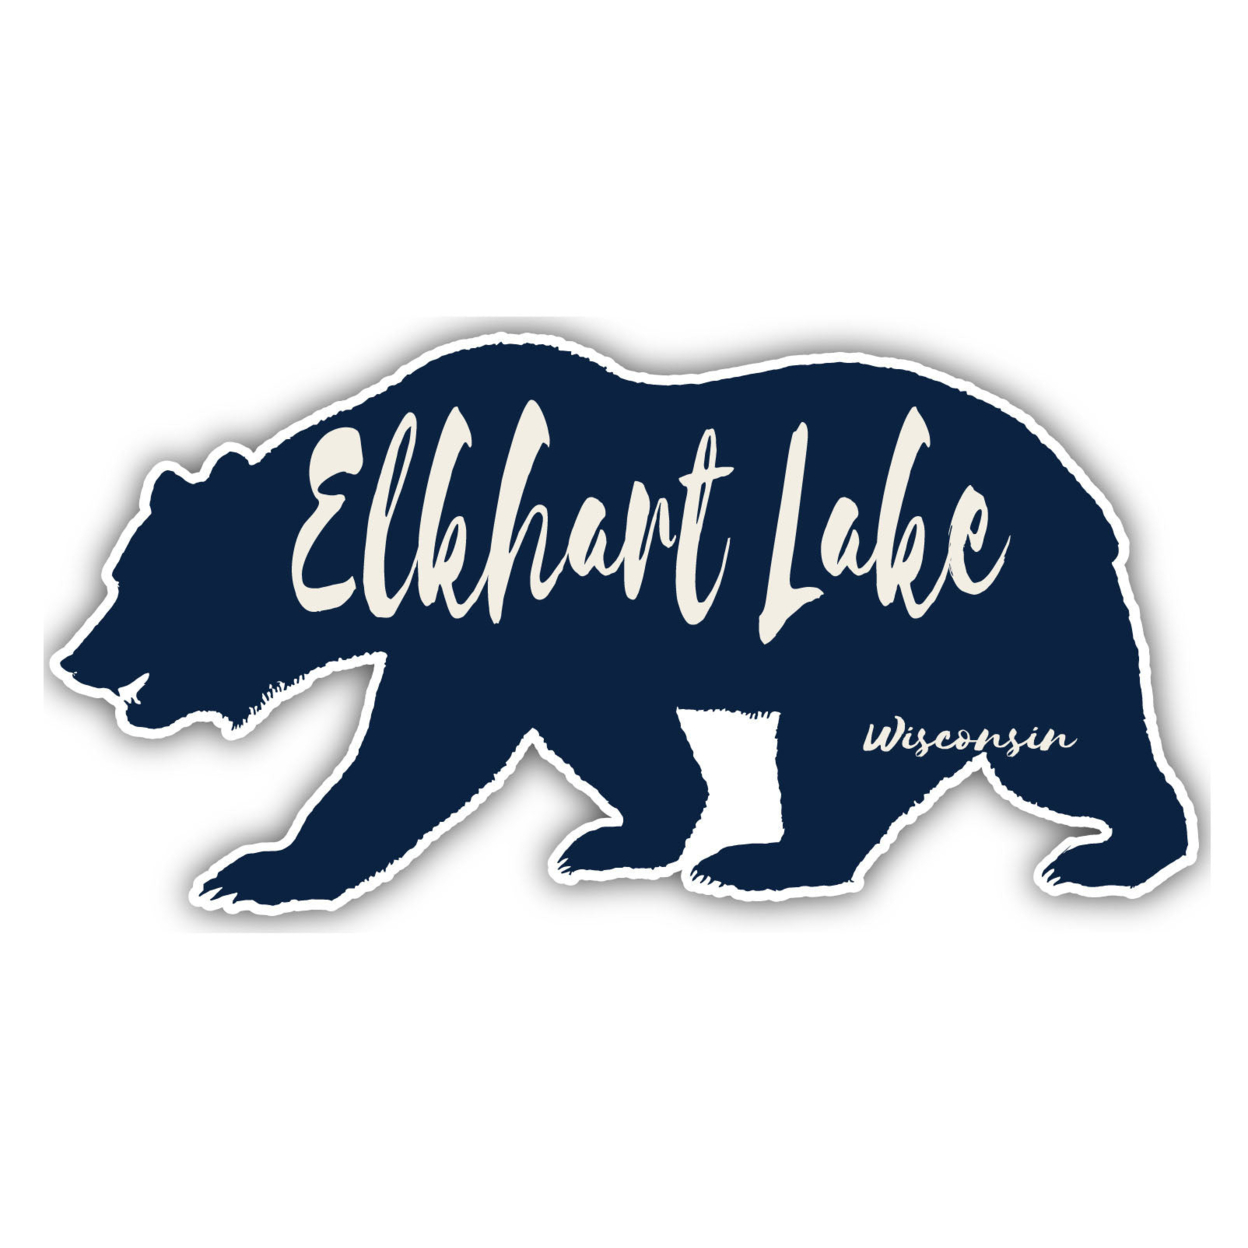 Elkhart Lake Wisconsin Souvenir Decorative Stickers (Choose Theme And Size) - 4-Pack, 10-Inch, Bear